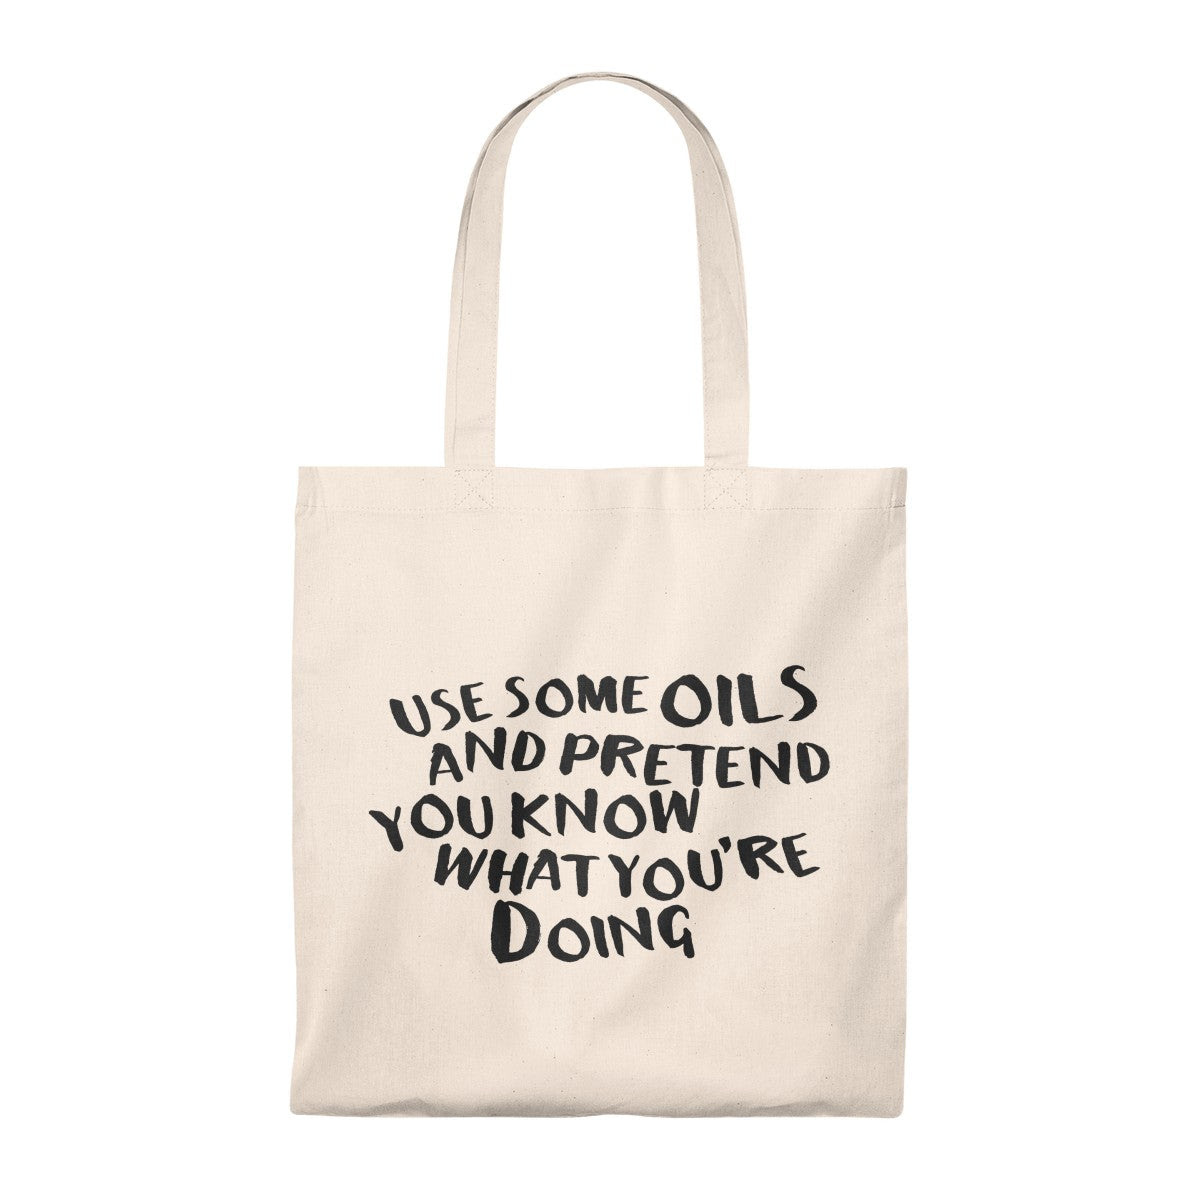 Image of "Use Some Oils and Pretend" Canvas Tote Bag